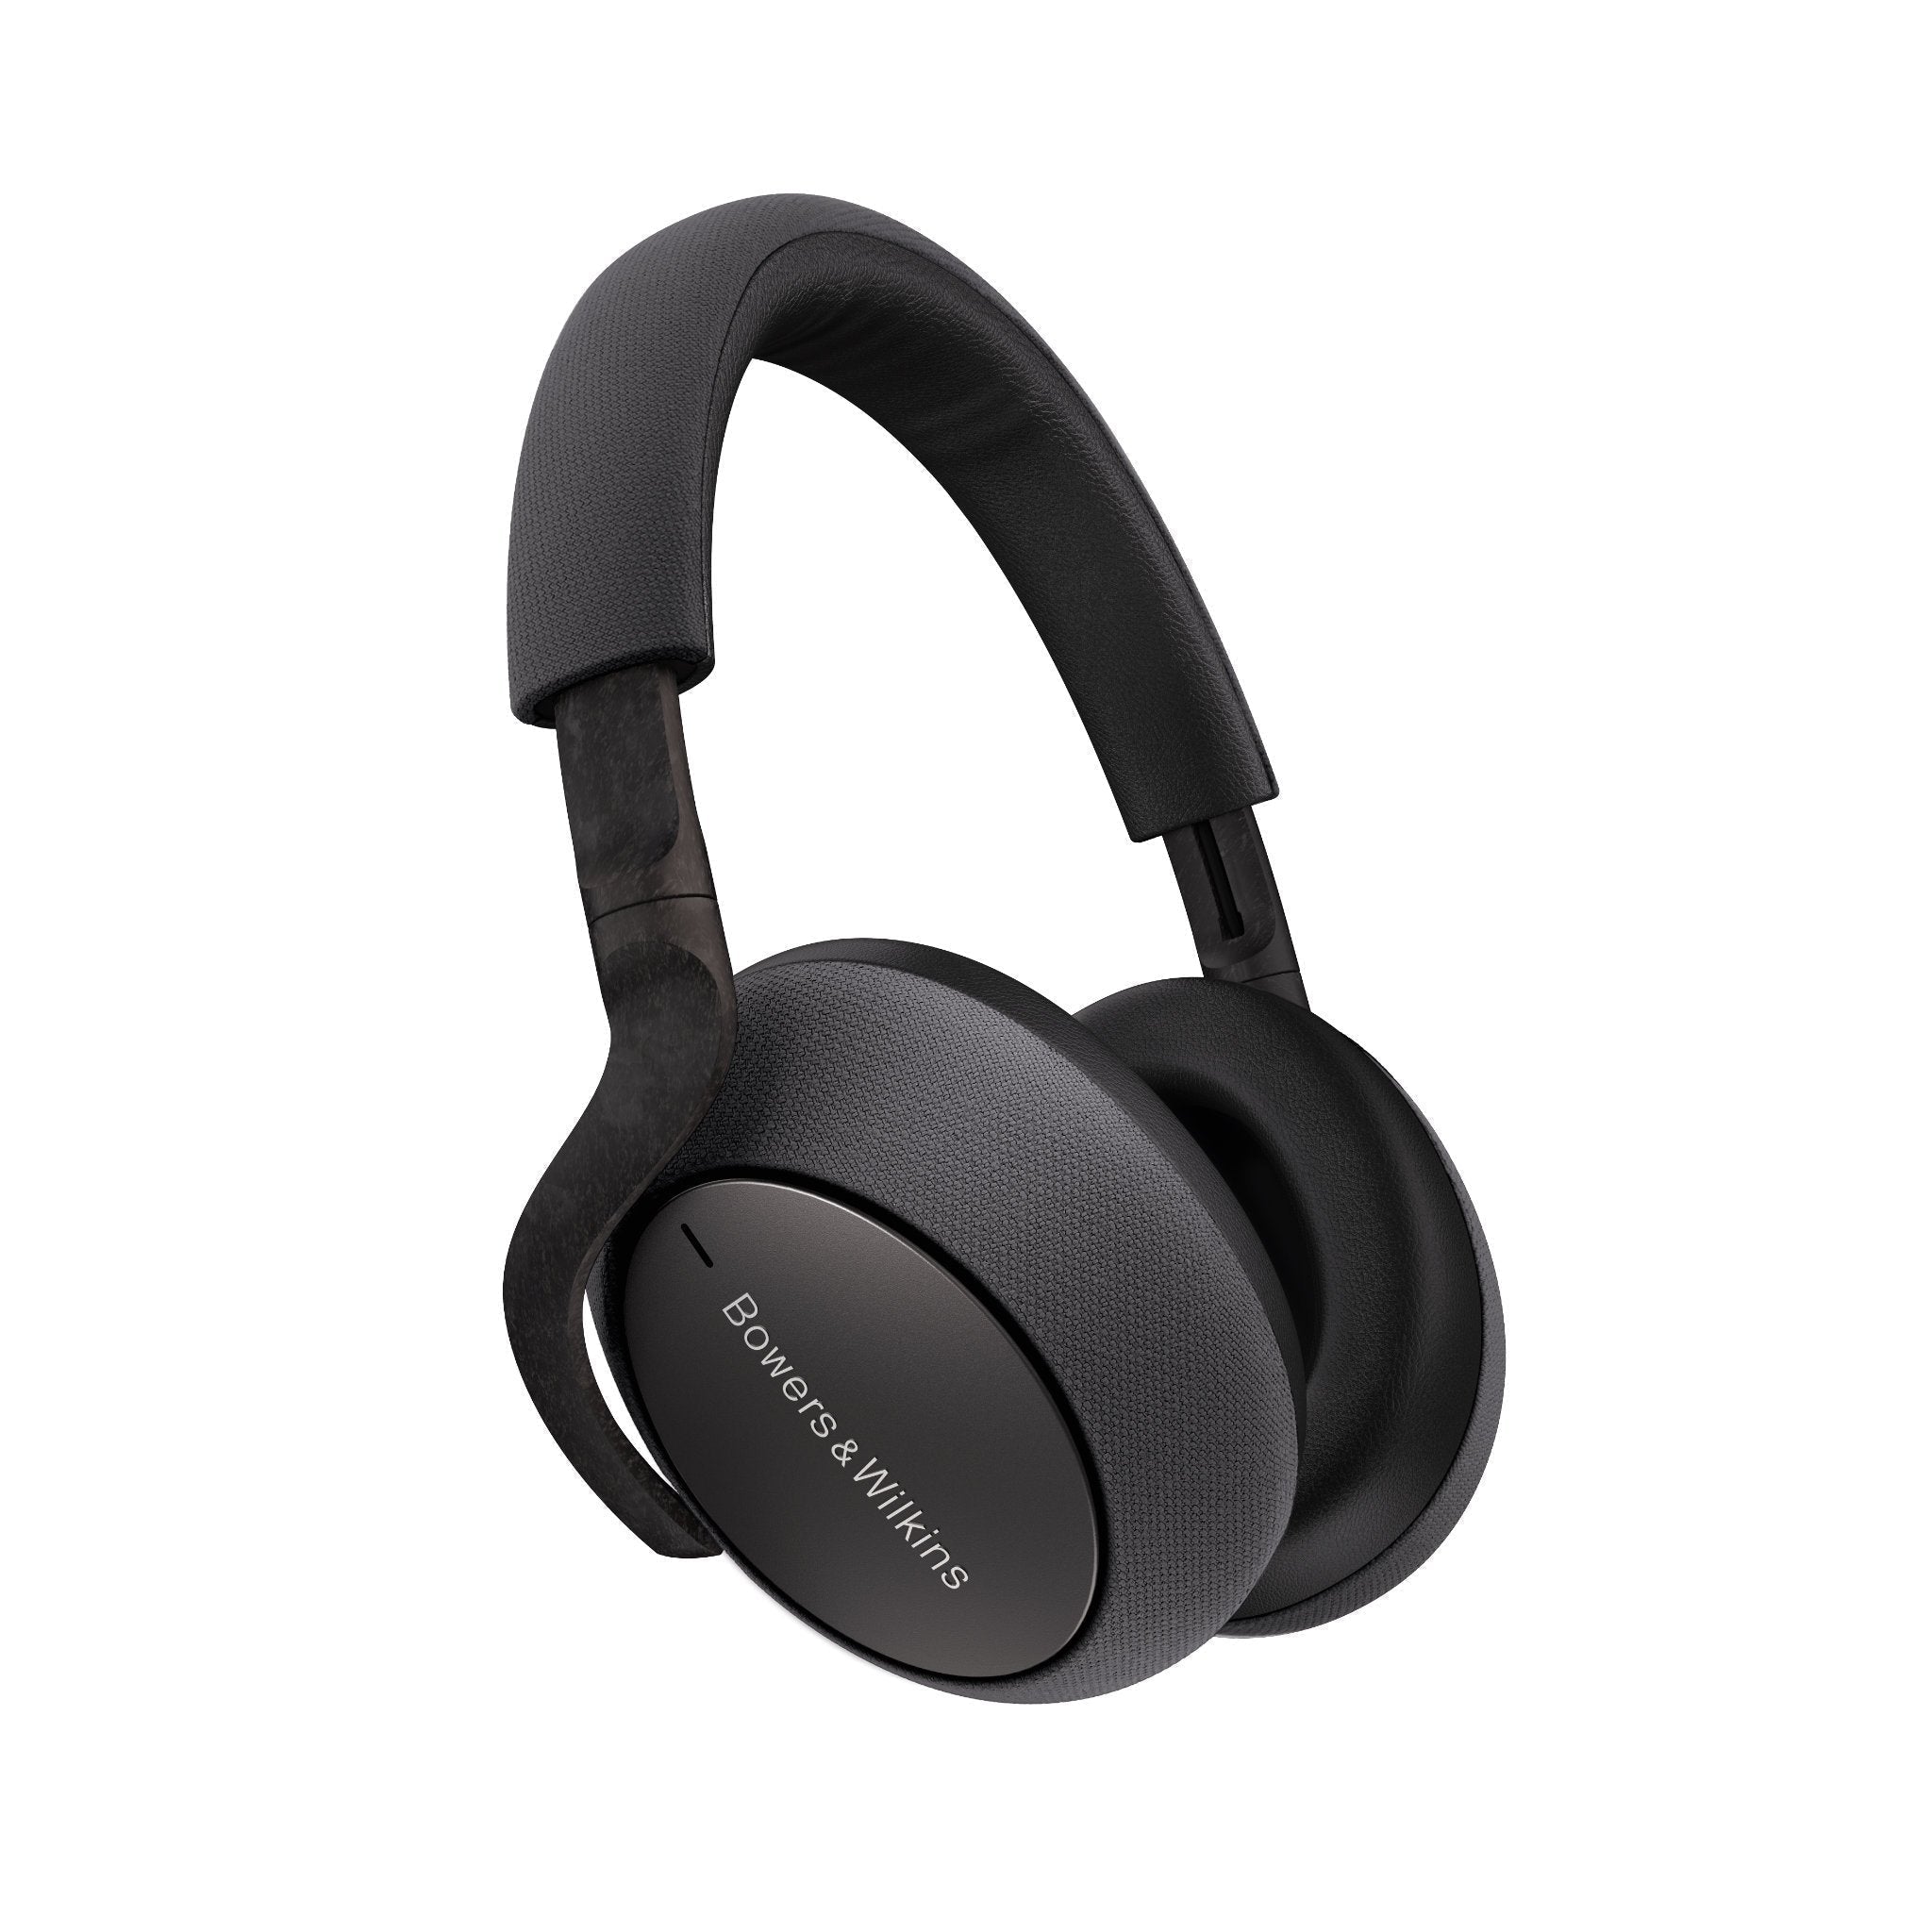 Bowers & Wilkins - PX7 - Over-Ear Noise Cancelling Wireless Headphones, Voted #1 NSW HiFi Store